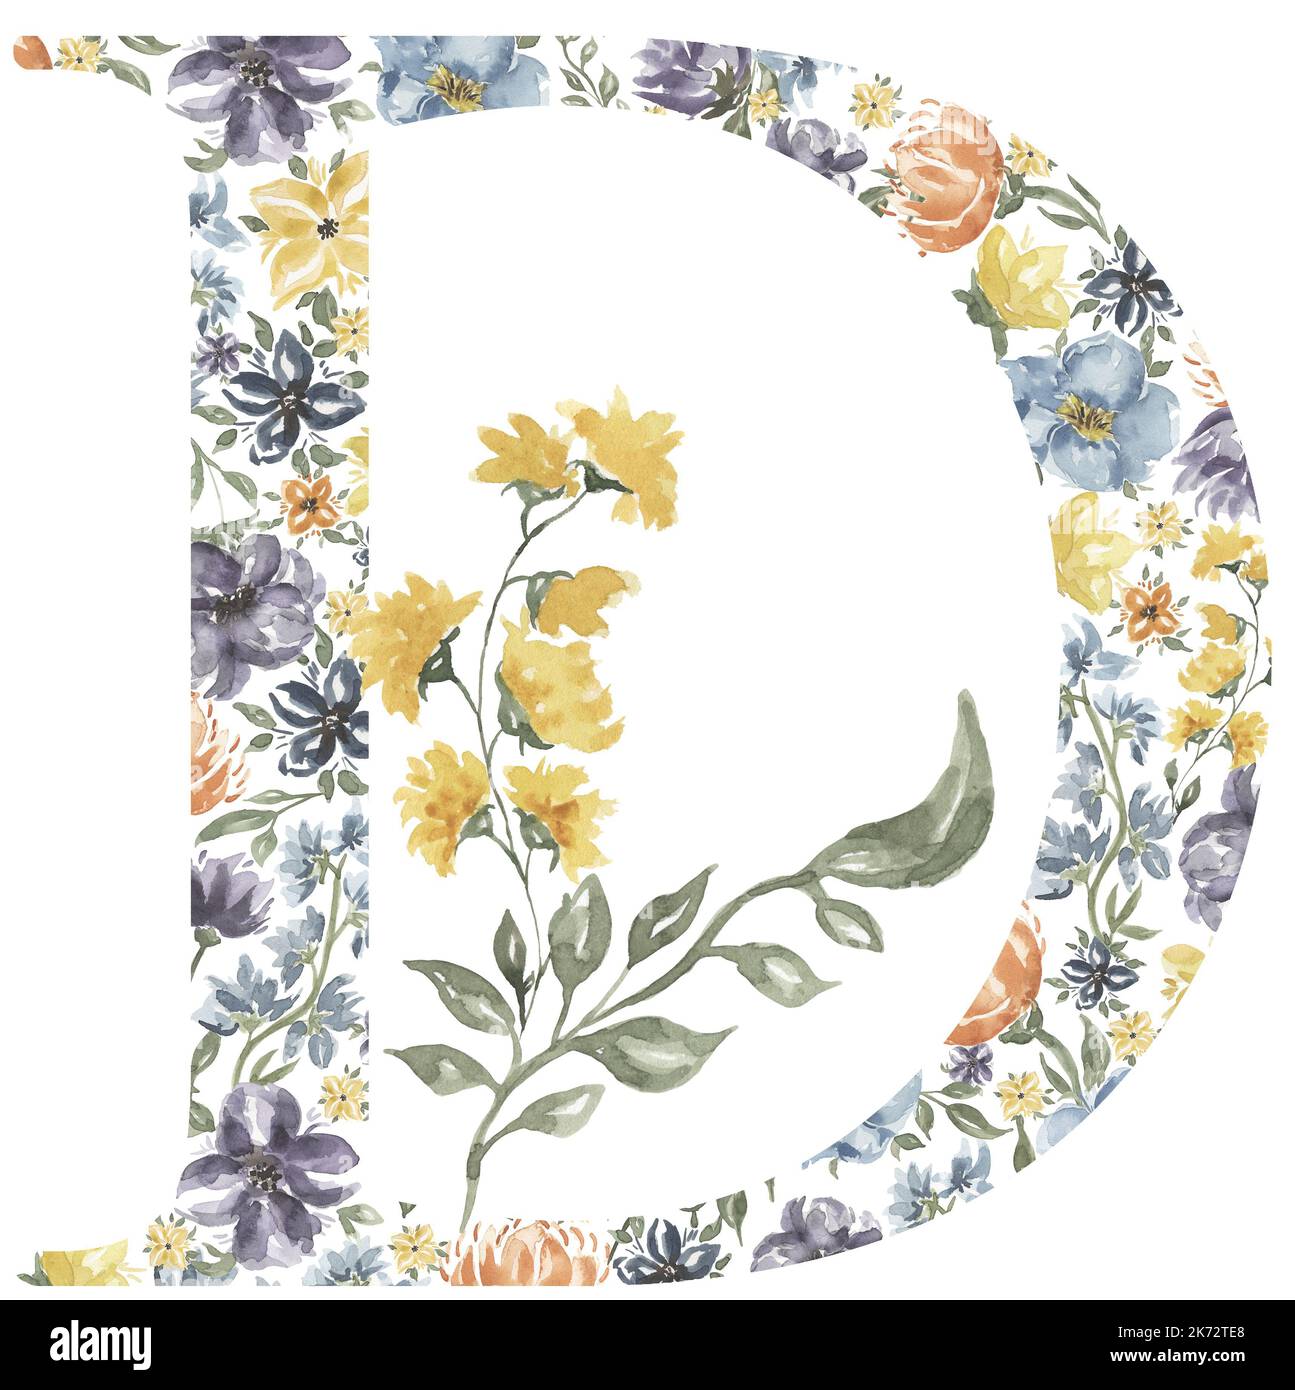 Wildflowers D letter clipart, Blossom Alphabet Design. Watercolor Floral monogram illustration isolated on white background. Stock Photo